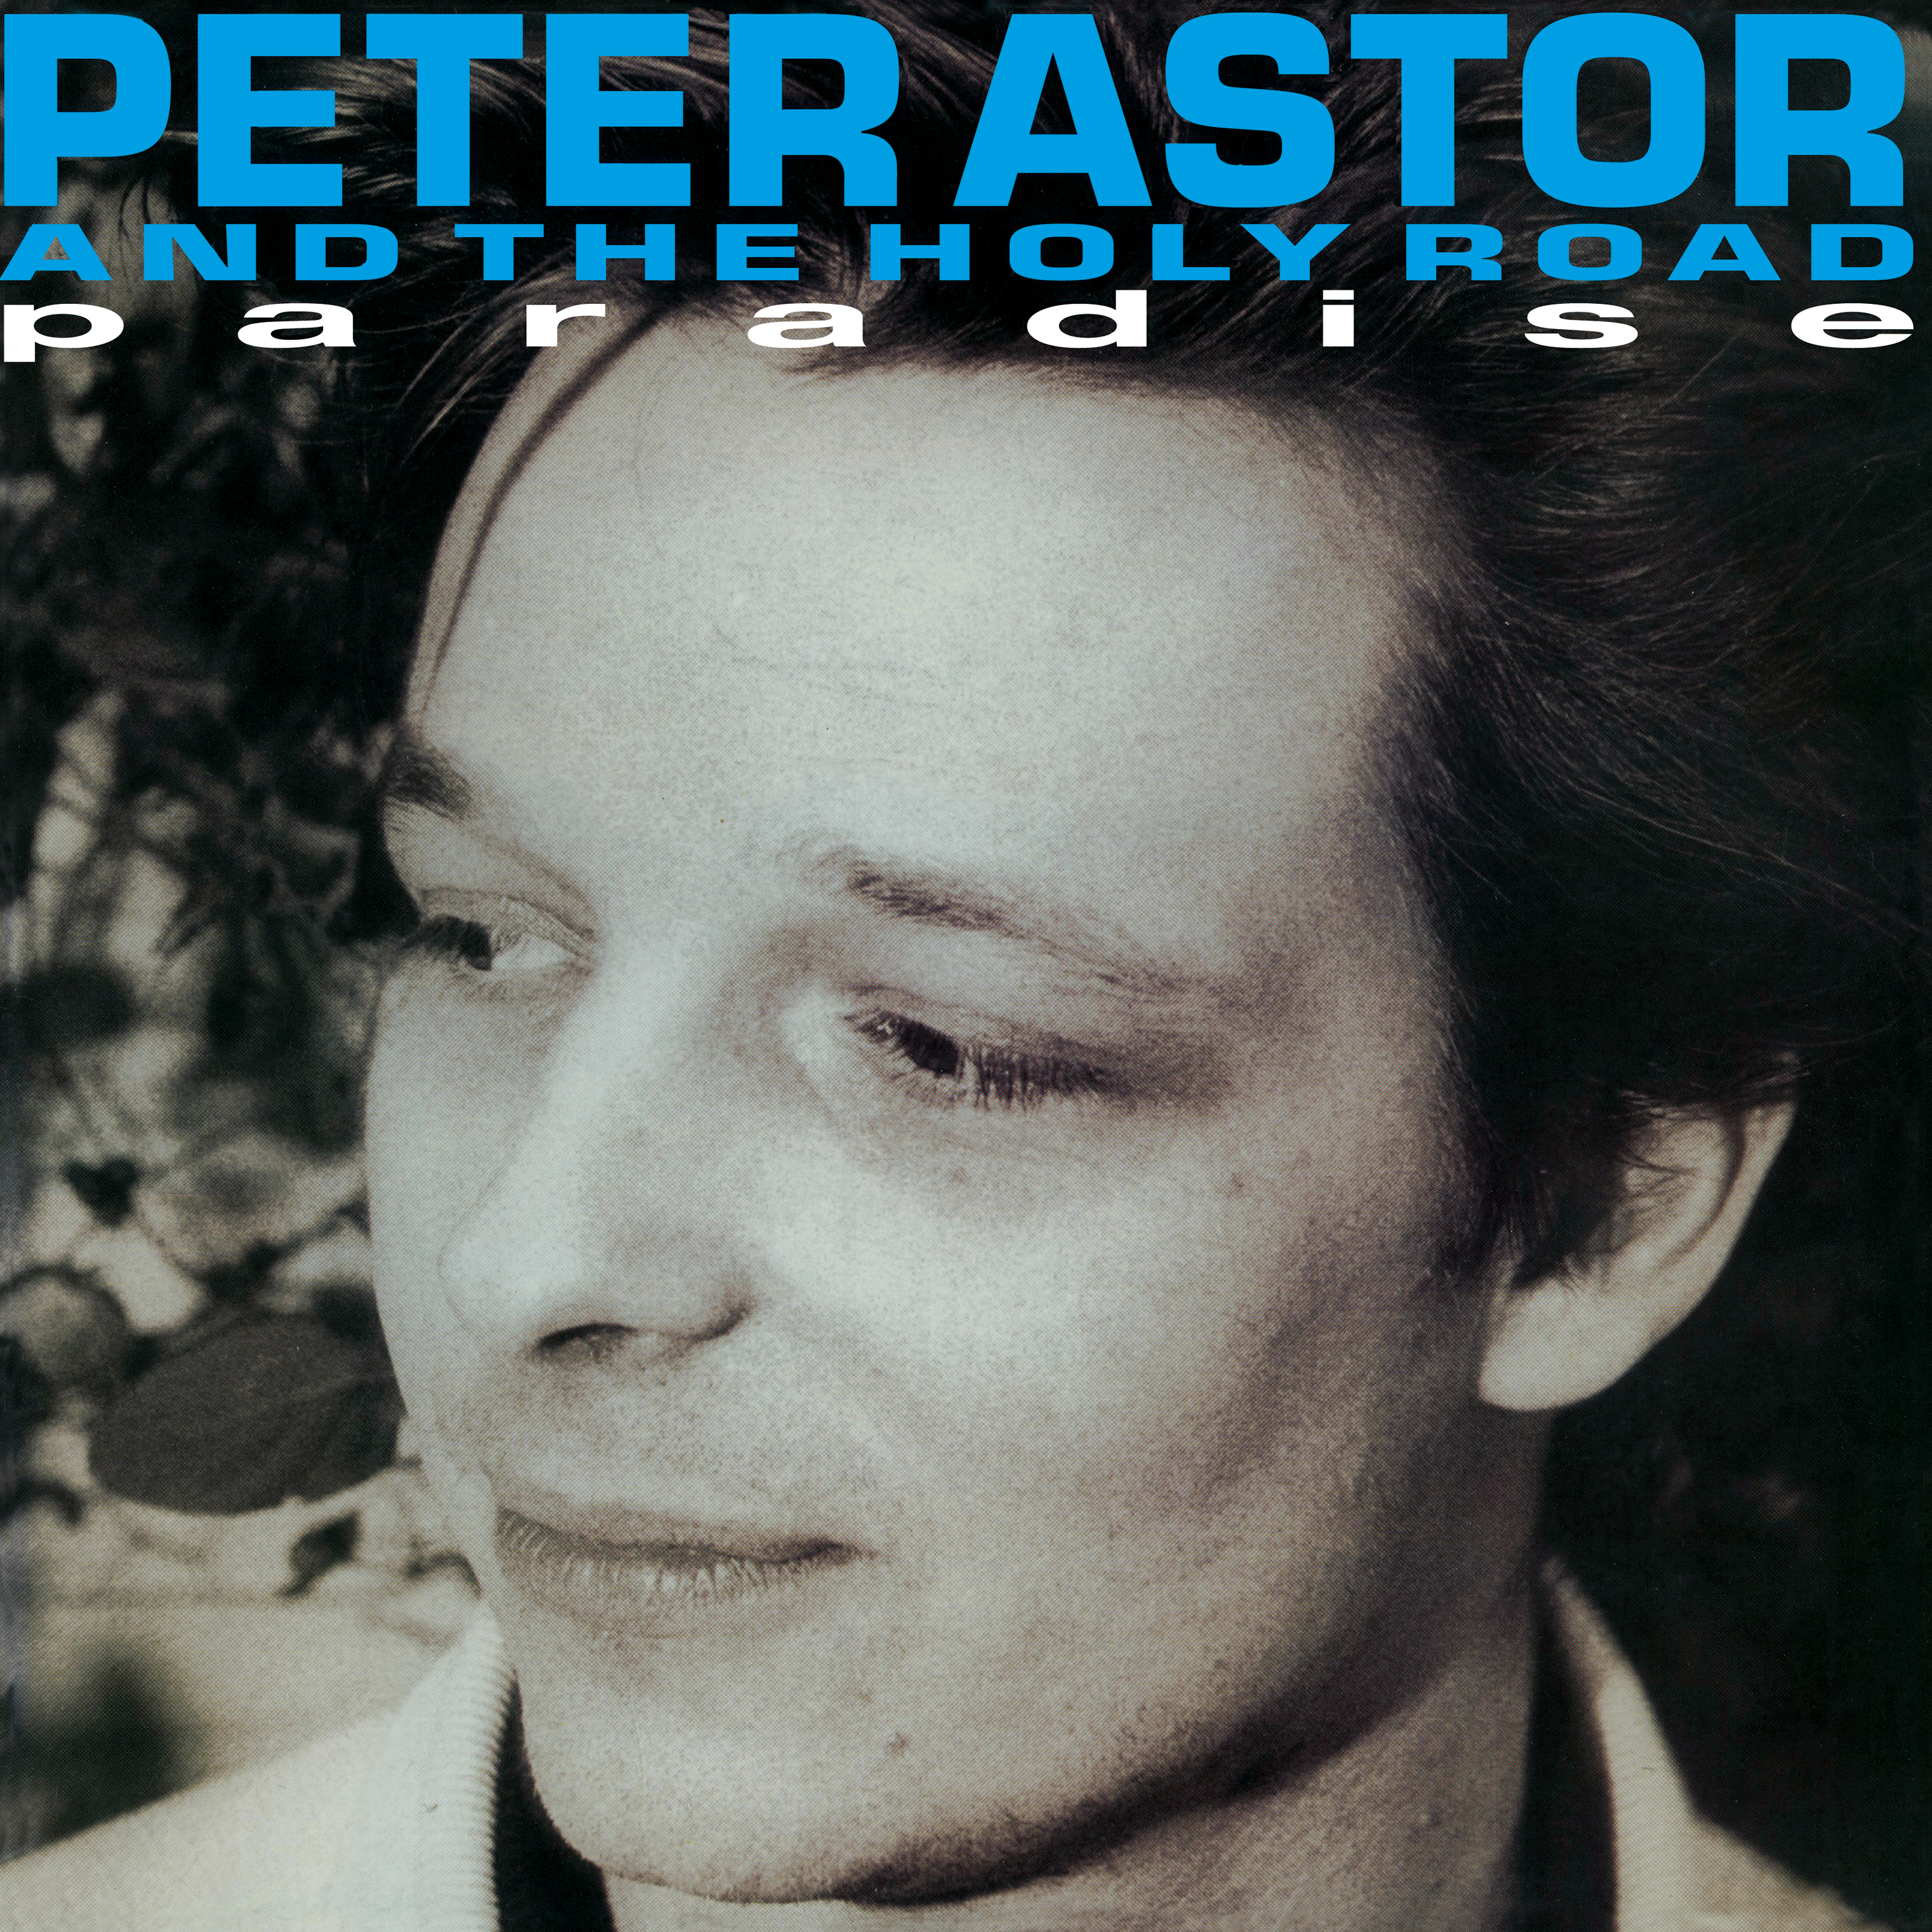 Pete Astor and the Holy Road - Paradise